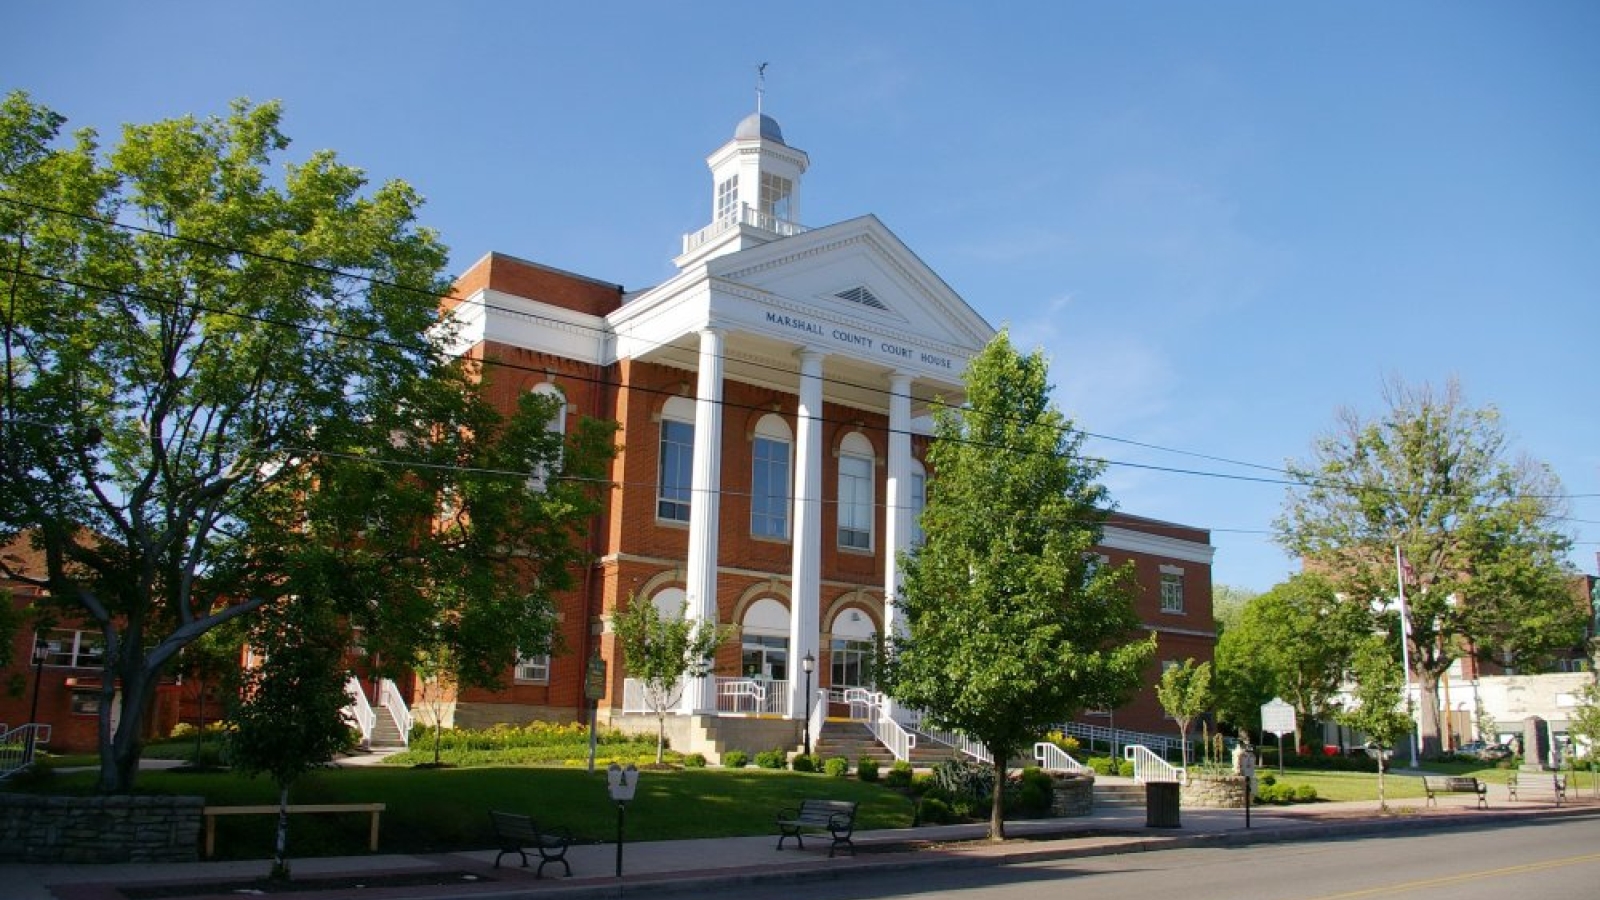 Marshall County Courthouse photo by John Deacon